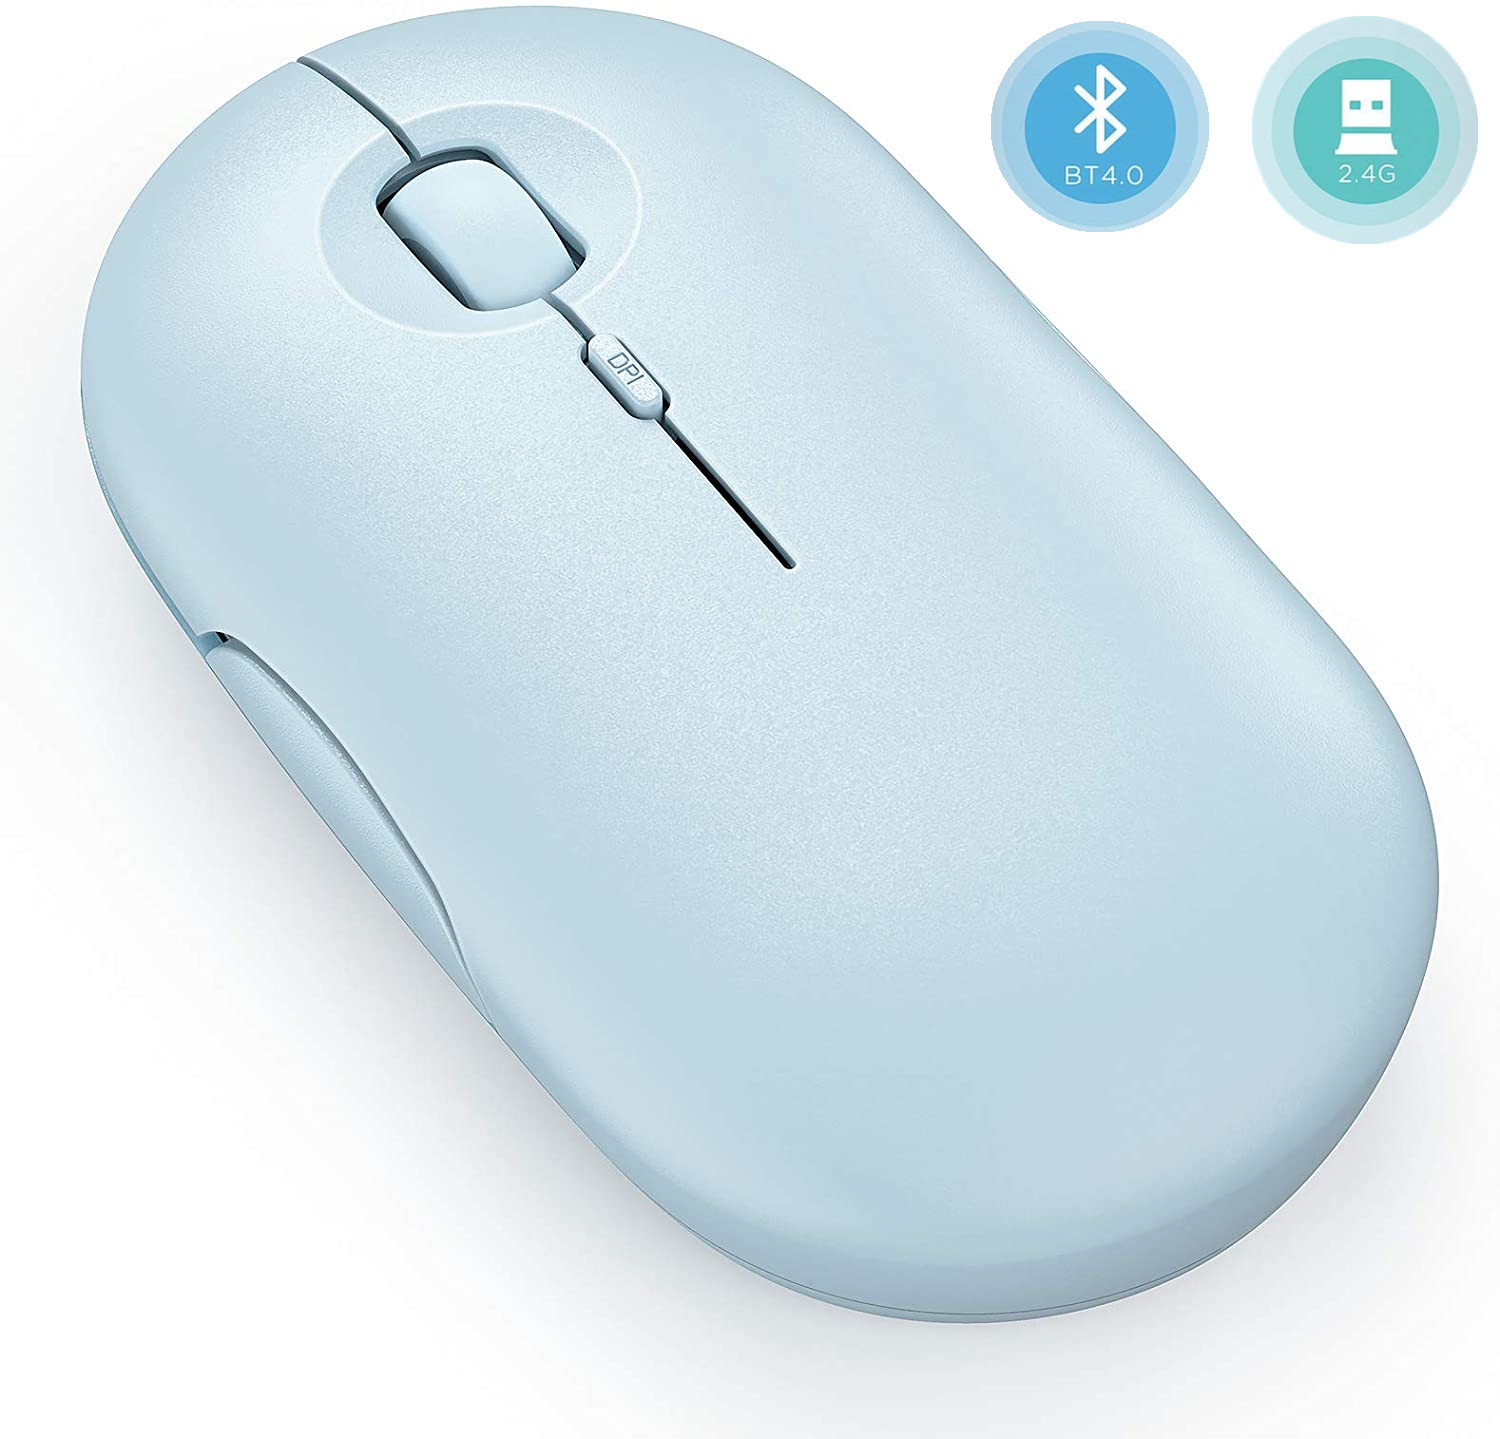 Vive Comb Dual Model Wireless Mouse (Bluetooth + USB Receiver) with Easy Switch, Rechargeble built-in Battery, 3 Adjustable DPI, Baby Blue Optical Mice compatible for Desktop, Laptop, Macbook - image 1 of 7